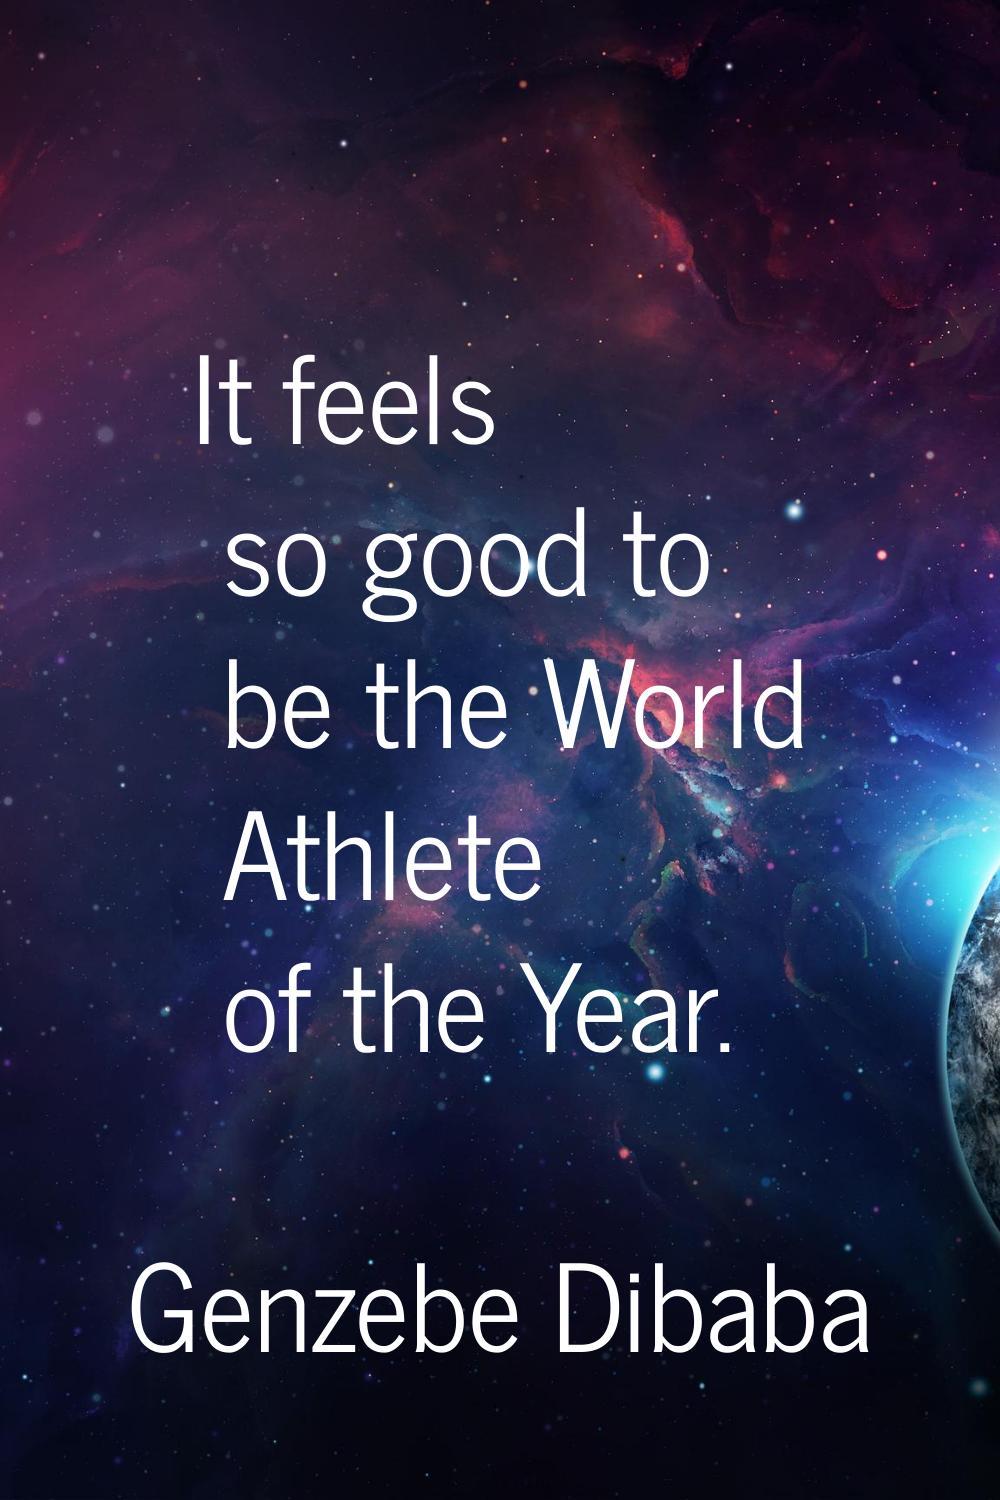 It feels so good to be the World Athlete of the Year.